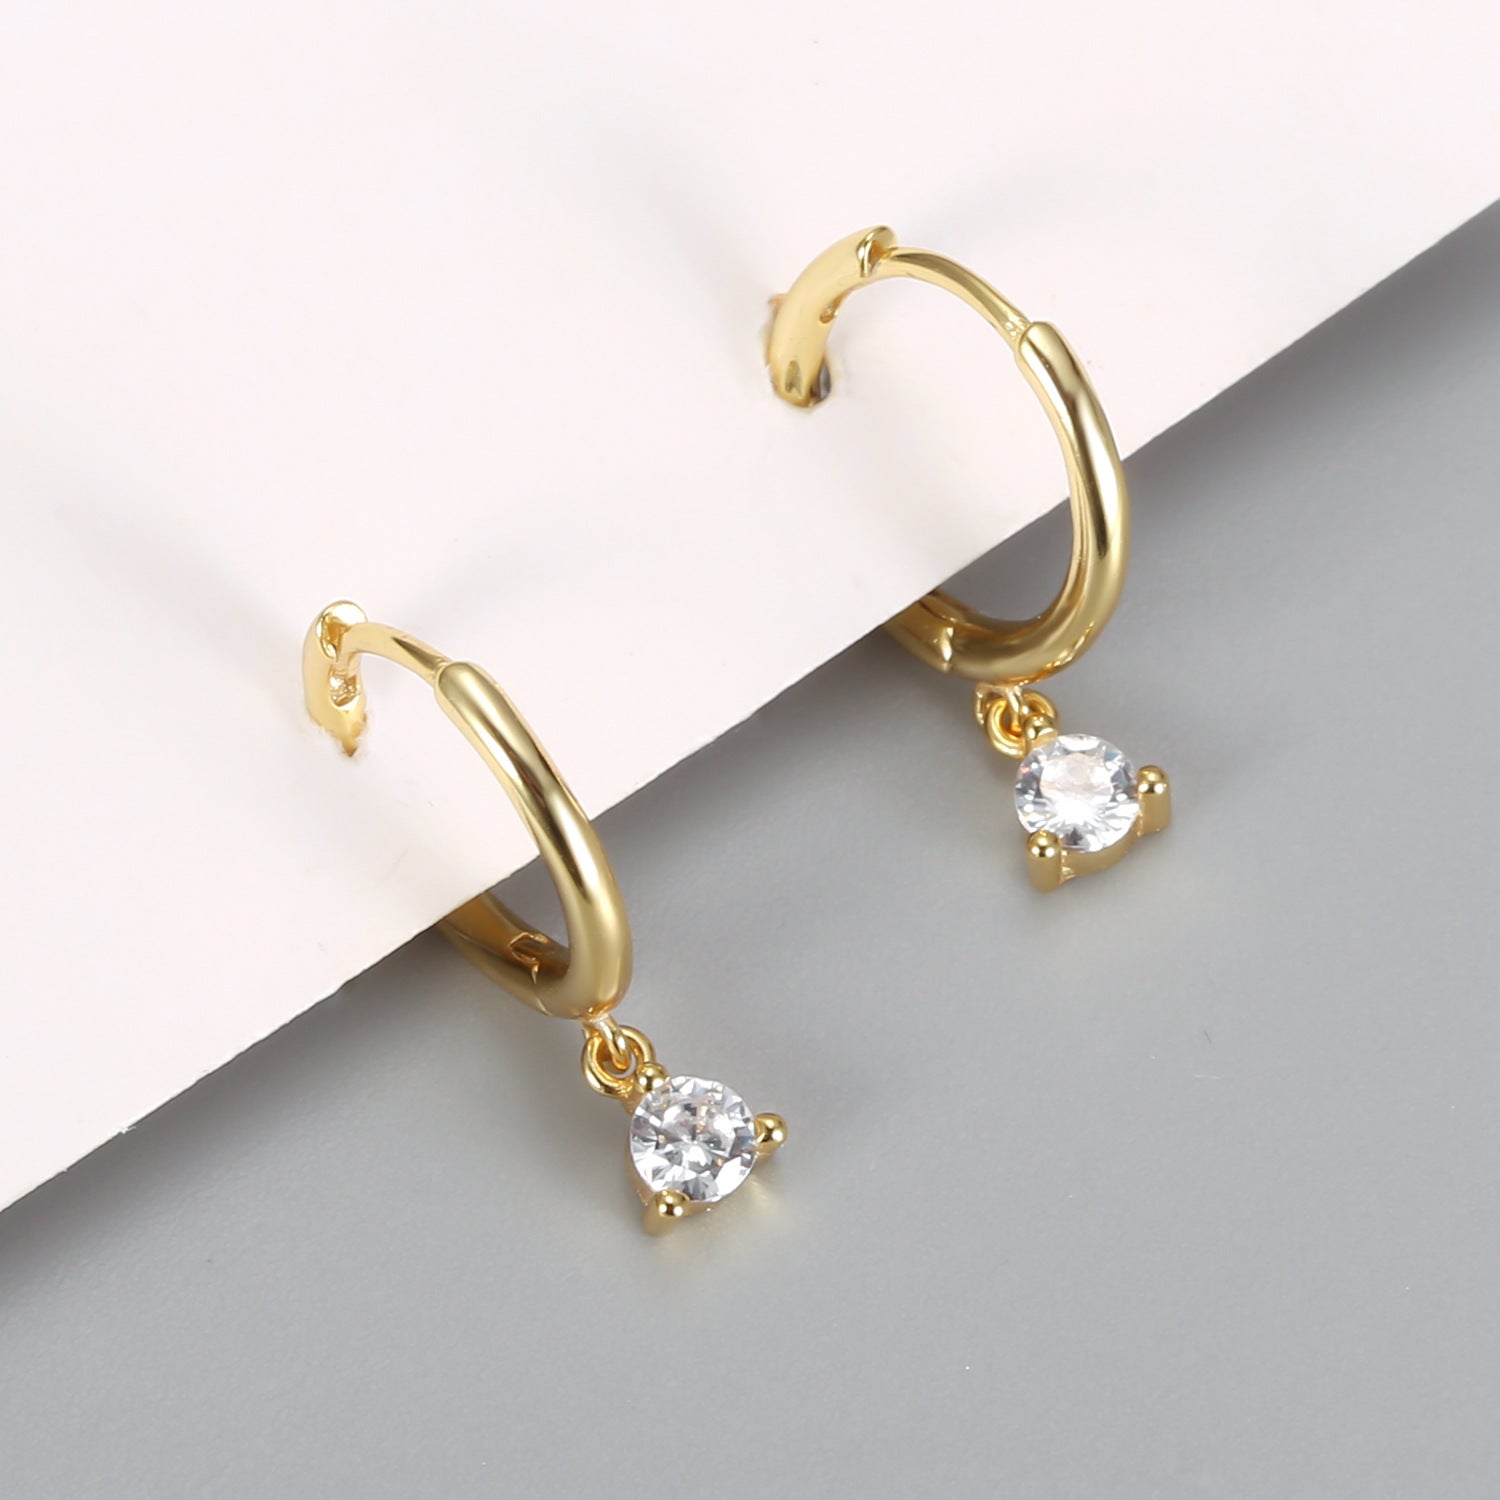 A pair of Maramalive™ Diamond Earrings with a cubic zirconia.